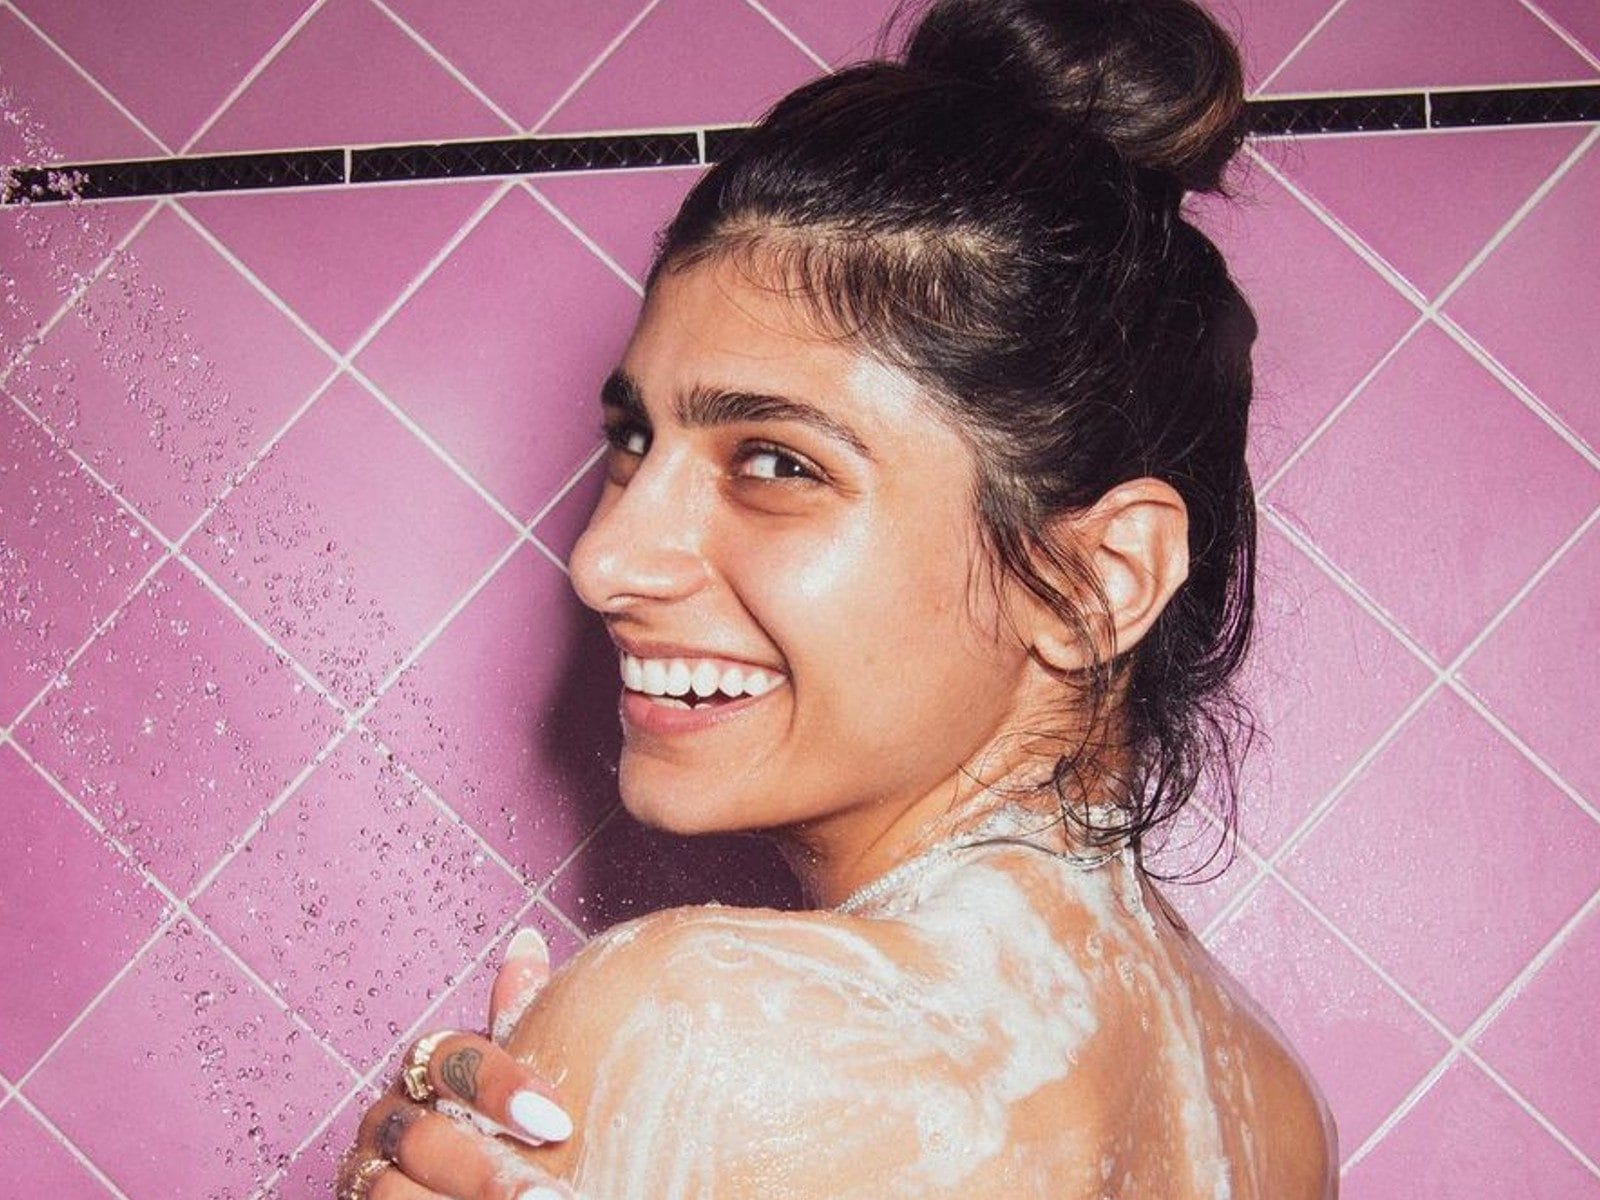 Sex Mia Khalifa New Videos - Mia Khalifa Posts Hot Bathing Pictures; Fans Say, 'Need Fire Extinguisher'  - News18